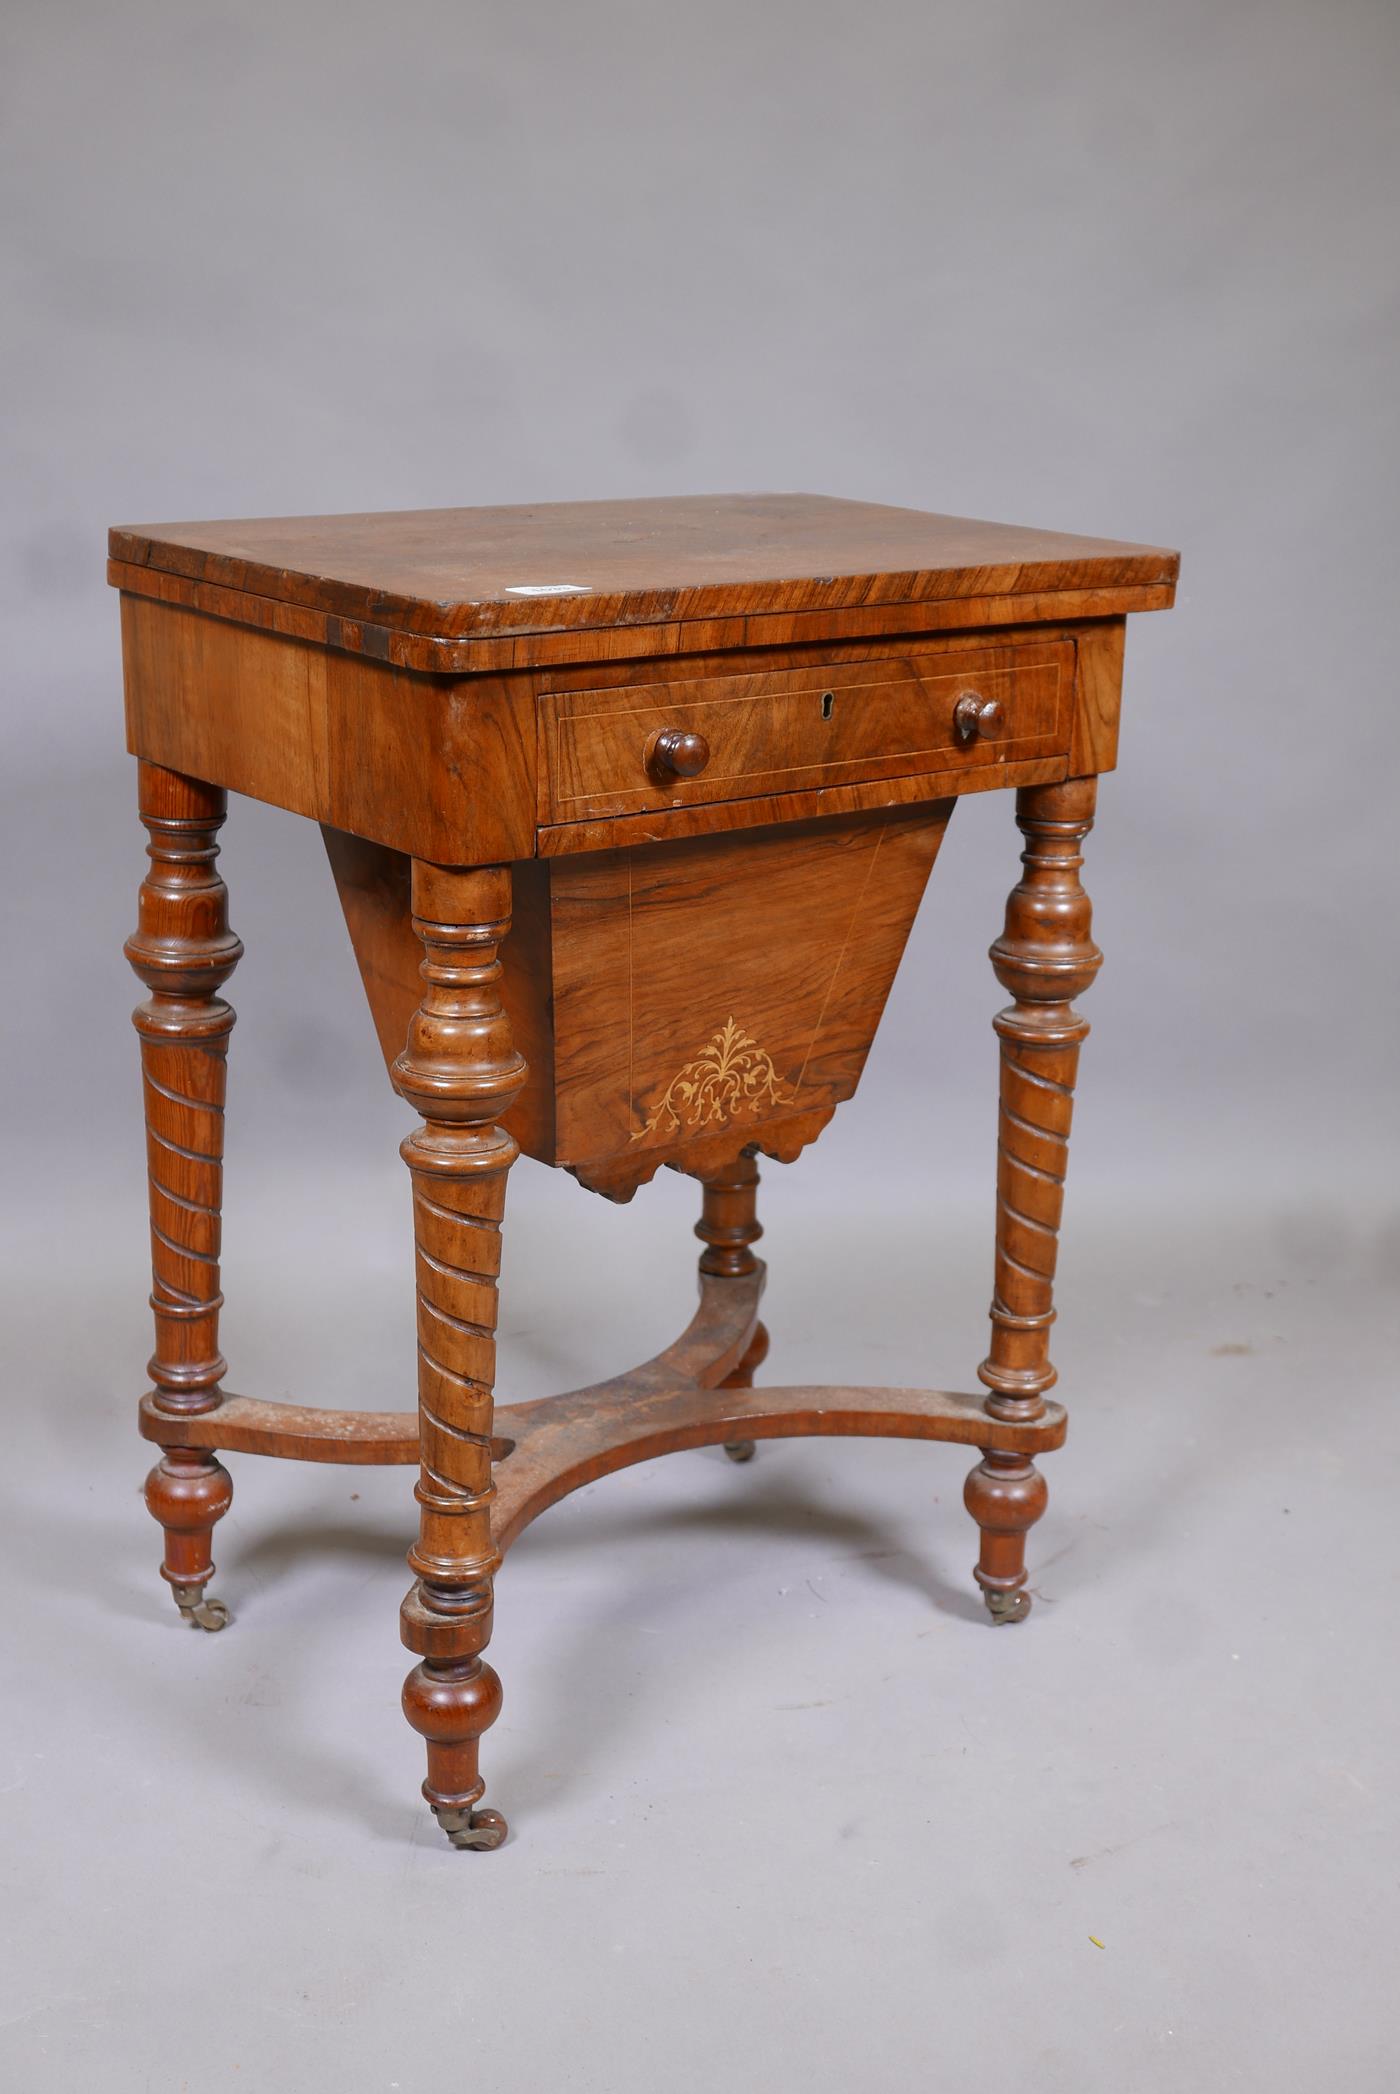 A C19th inlaid walnut work box, with fold out top inset with baize, frieze drawers and pull out